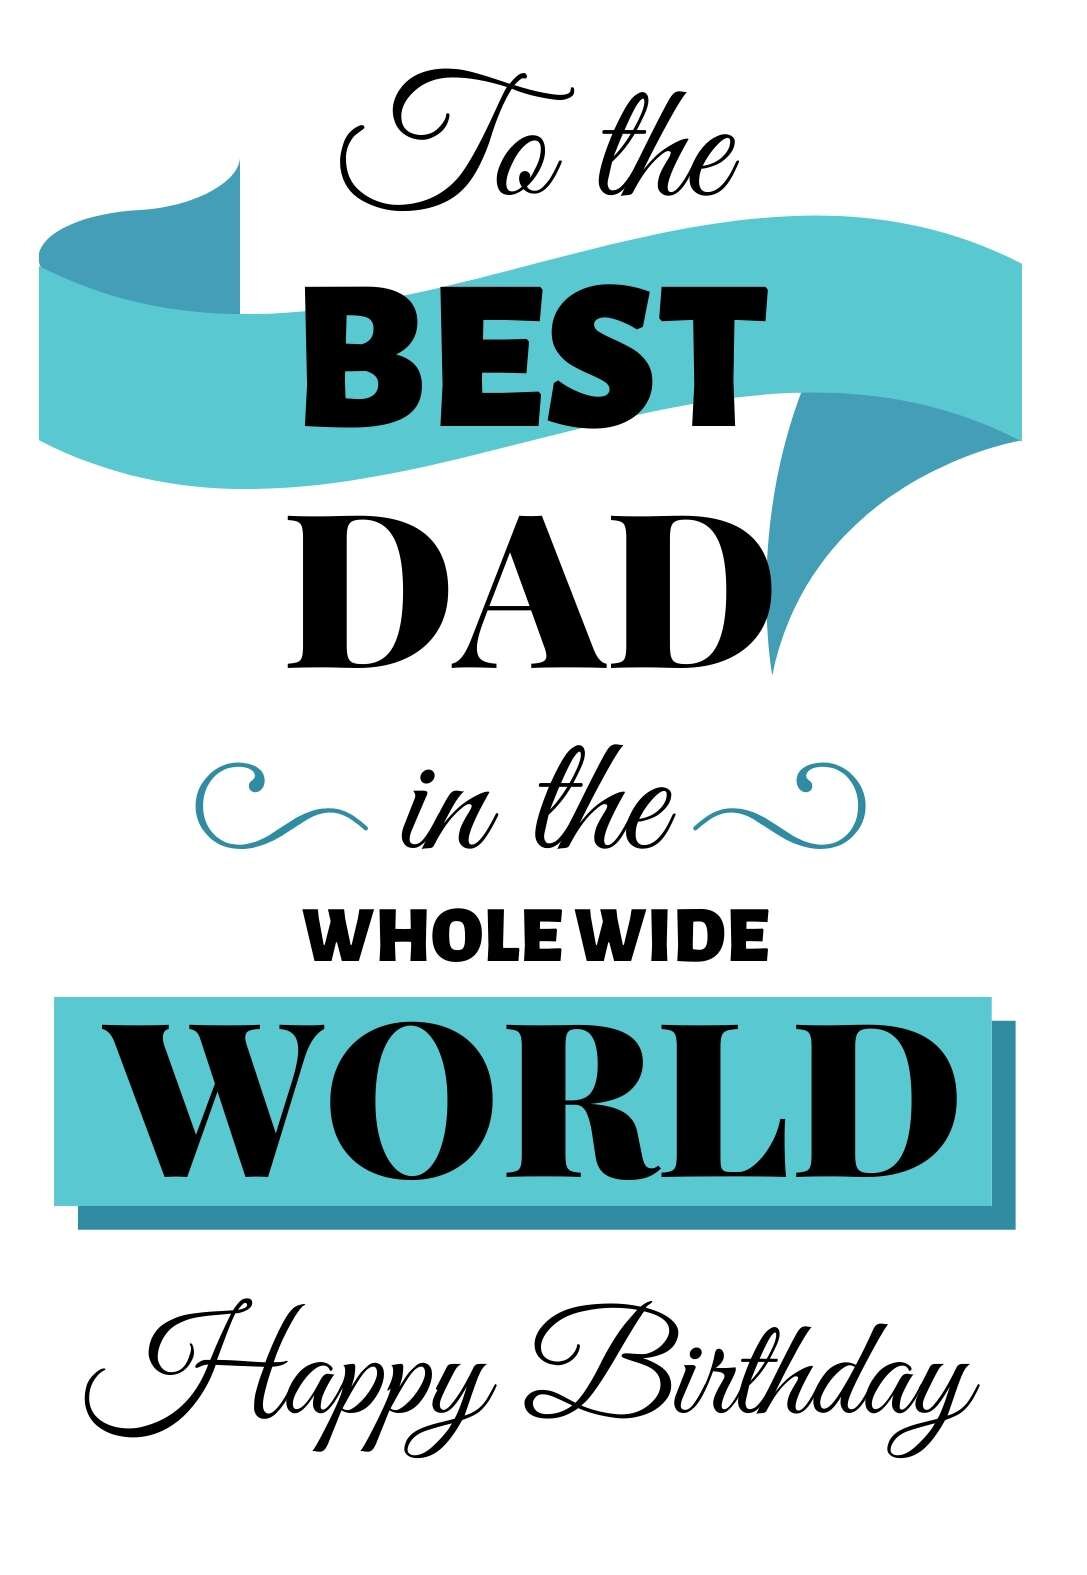 Printable Birthday Cards for Dads (free) — PRINTBIRTHDAY.CARDS